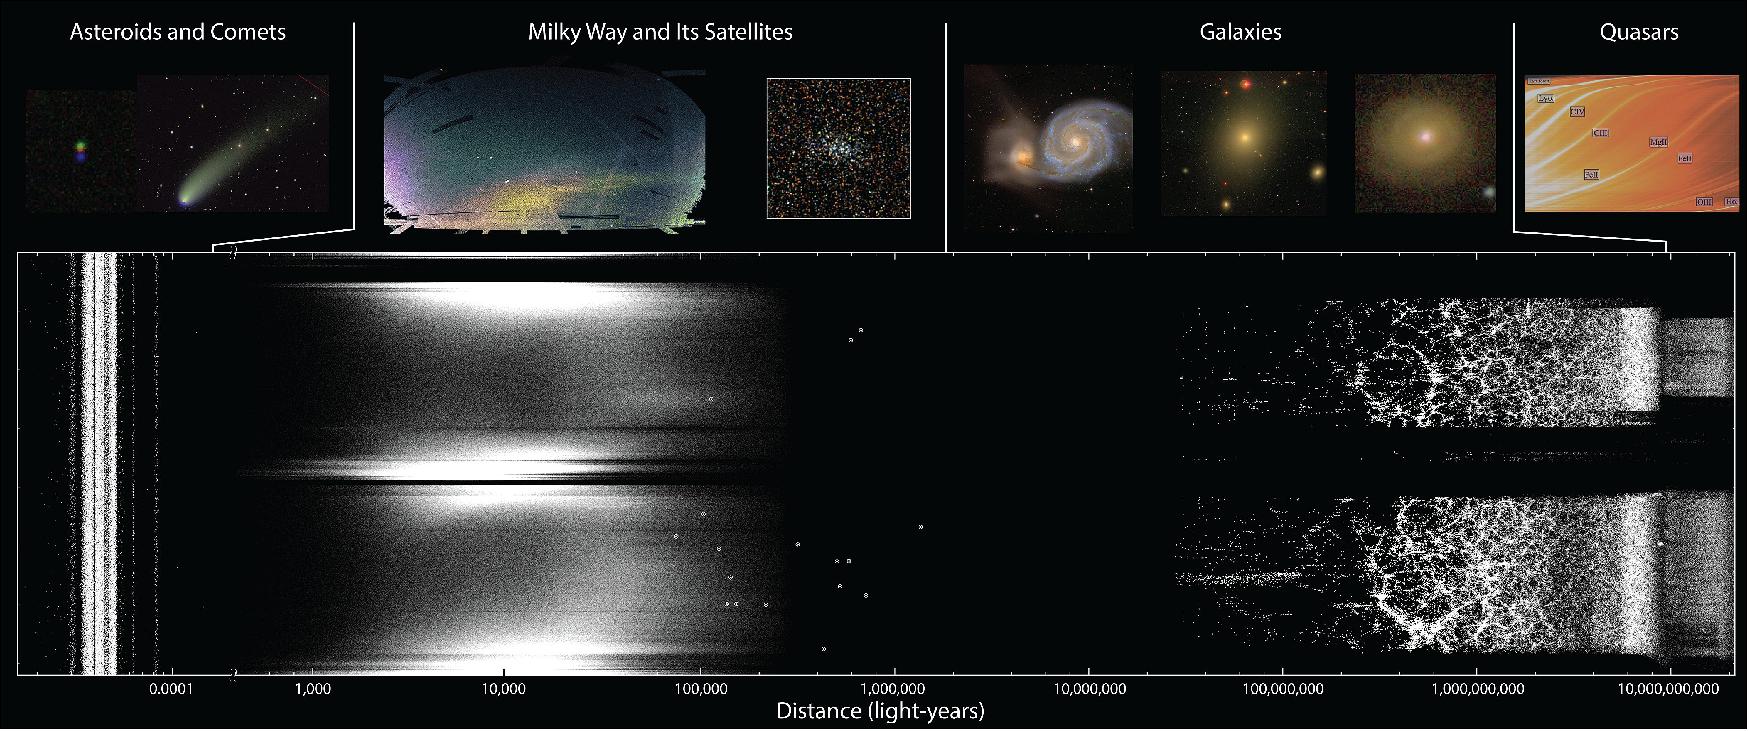 Figure 21: A map showing some of what the Sloan Digital Sky Survey has discovered over the last twenty years. The dots show the distance to various sky objects that the SDSS has discovered. The horizontal axis of the map is labeled in light-years, stretching from our own solar system to the most distant reaches of the universe. Sample images at the top show some of the things the SDSS has seen (image credit: V. Belokurov, M. R. Blanton, A. Bonaca, X. Fan, M. C. Geha, R. H. Lupton, the SDSS Collaboration)